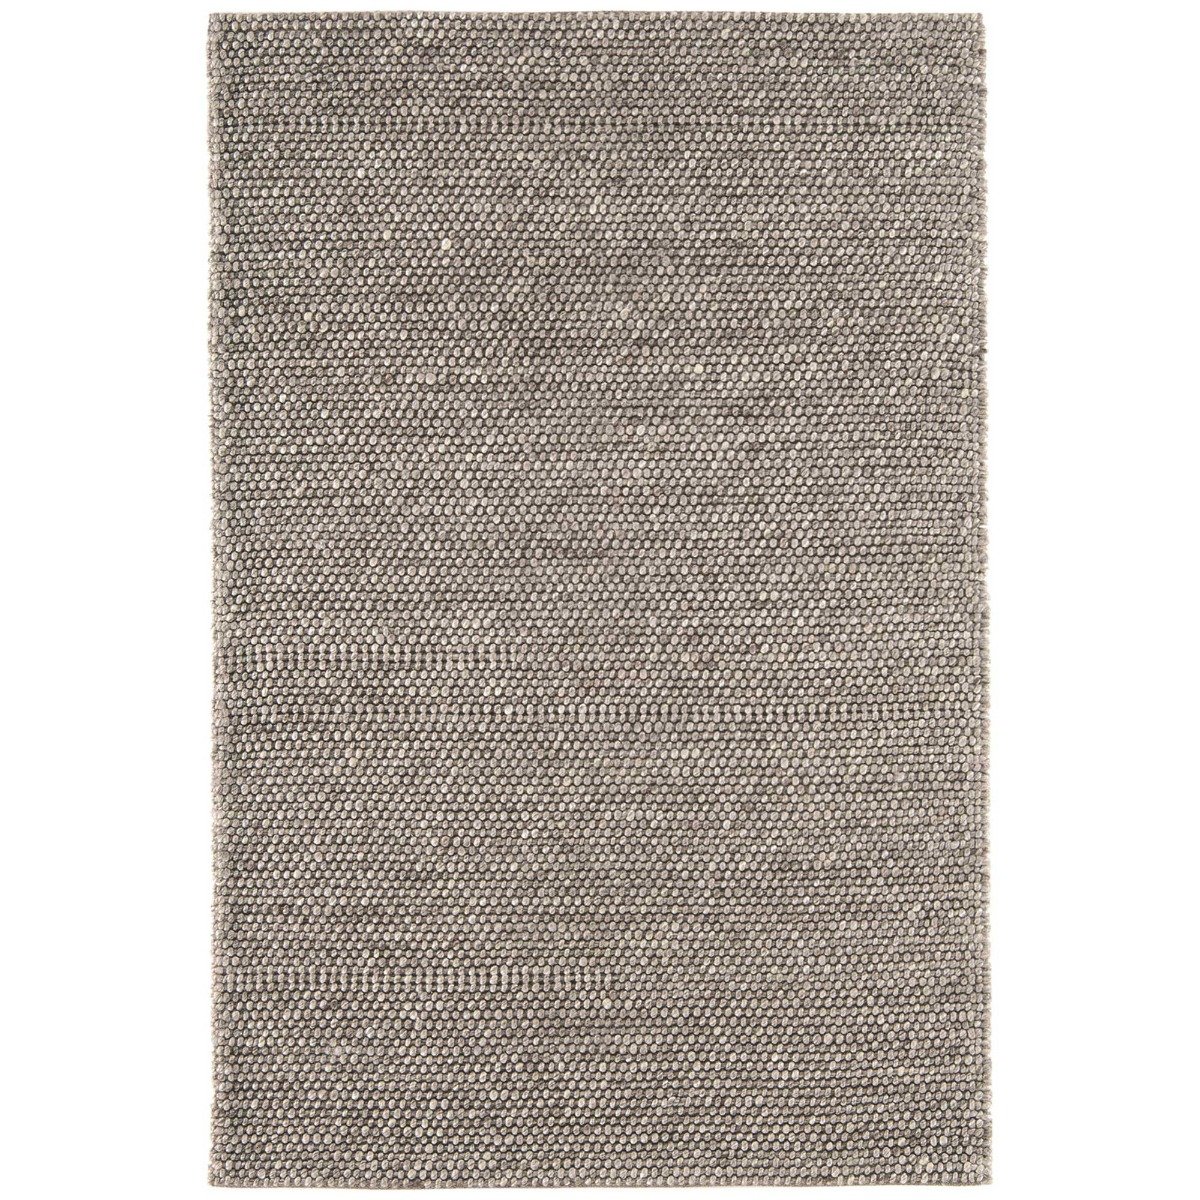 Flori Woven Taupe 160x230cm Rug, Square | W160cm | Barker & Stonehouse